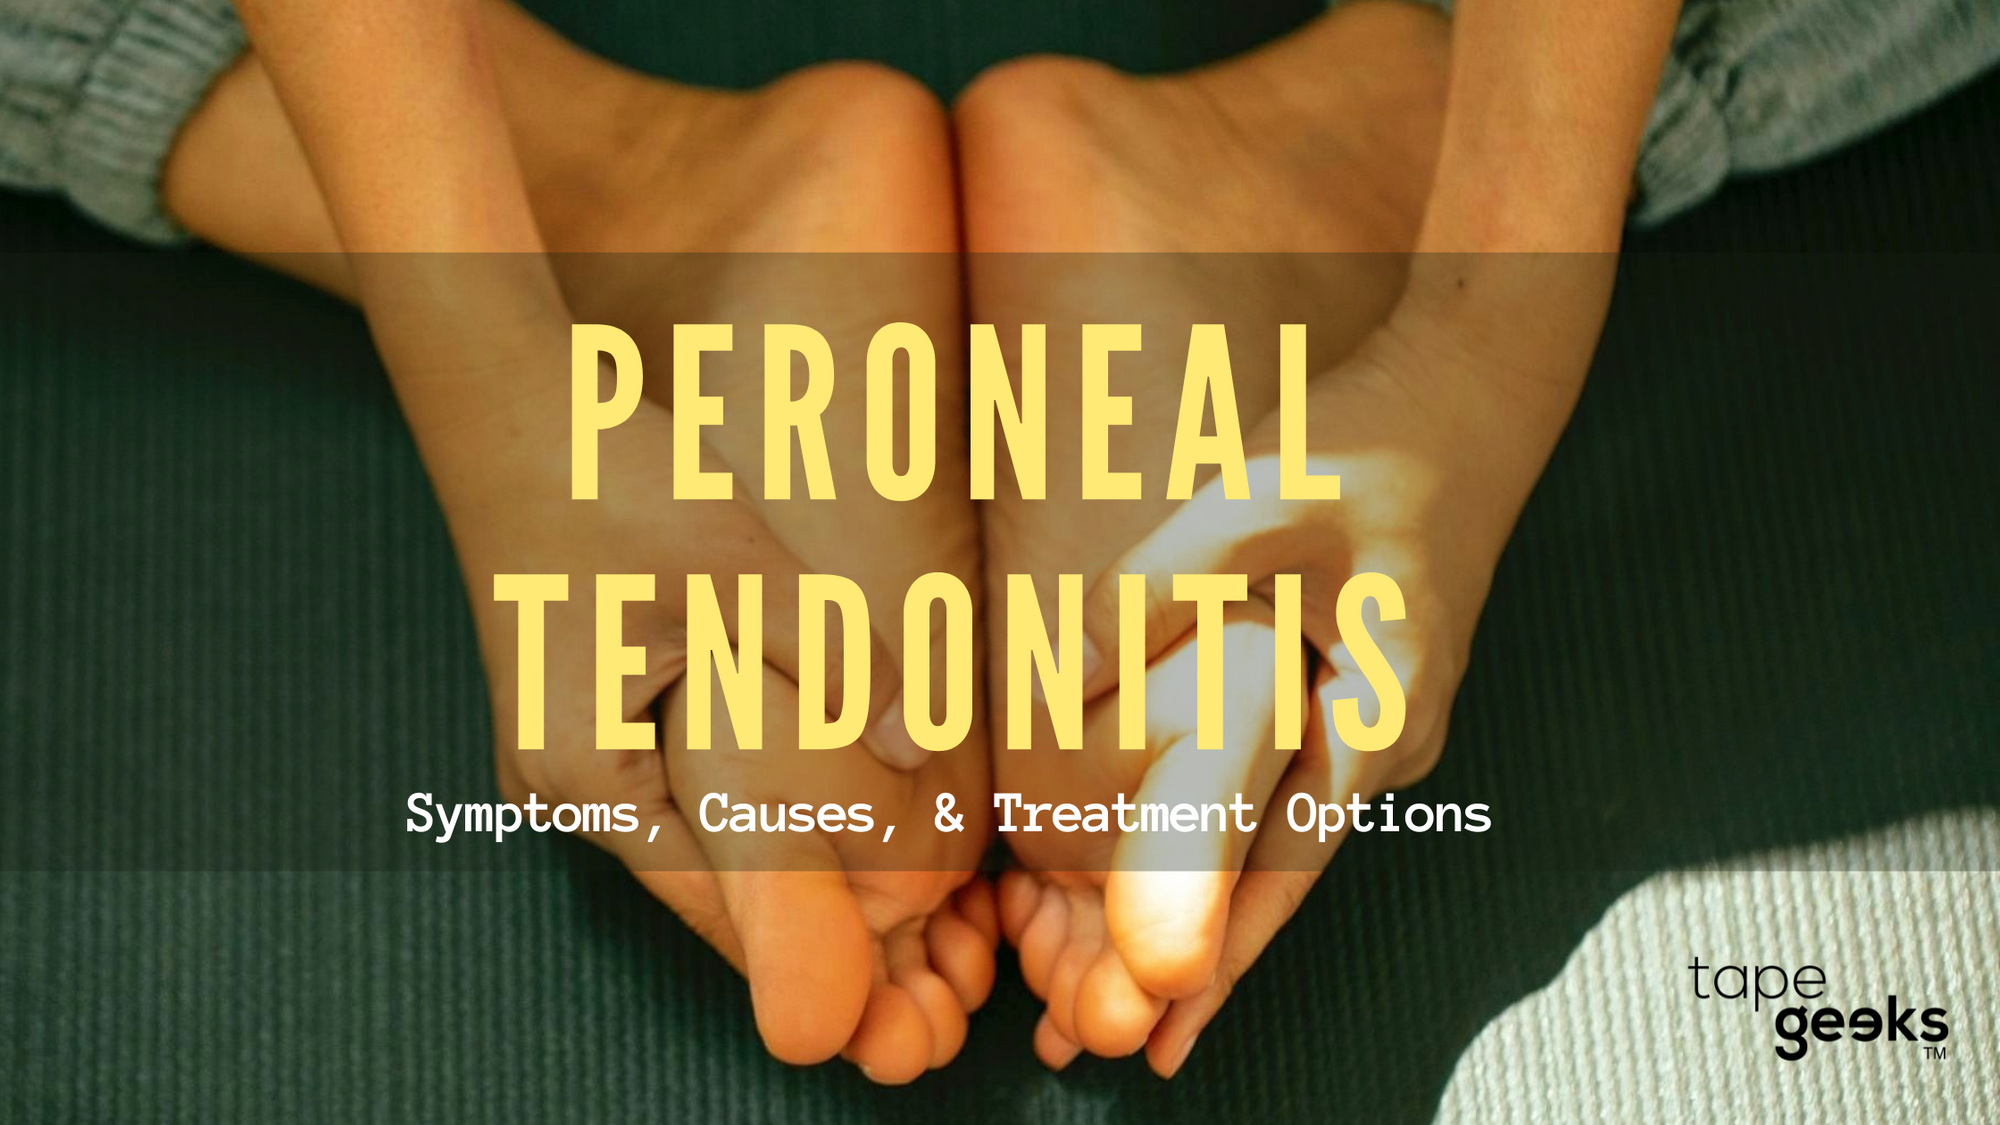 HOW DO YOU DO PERONEAL TENDONITIS TAPING?